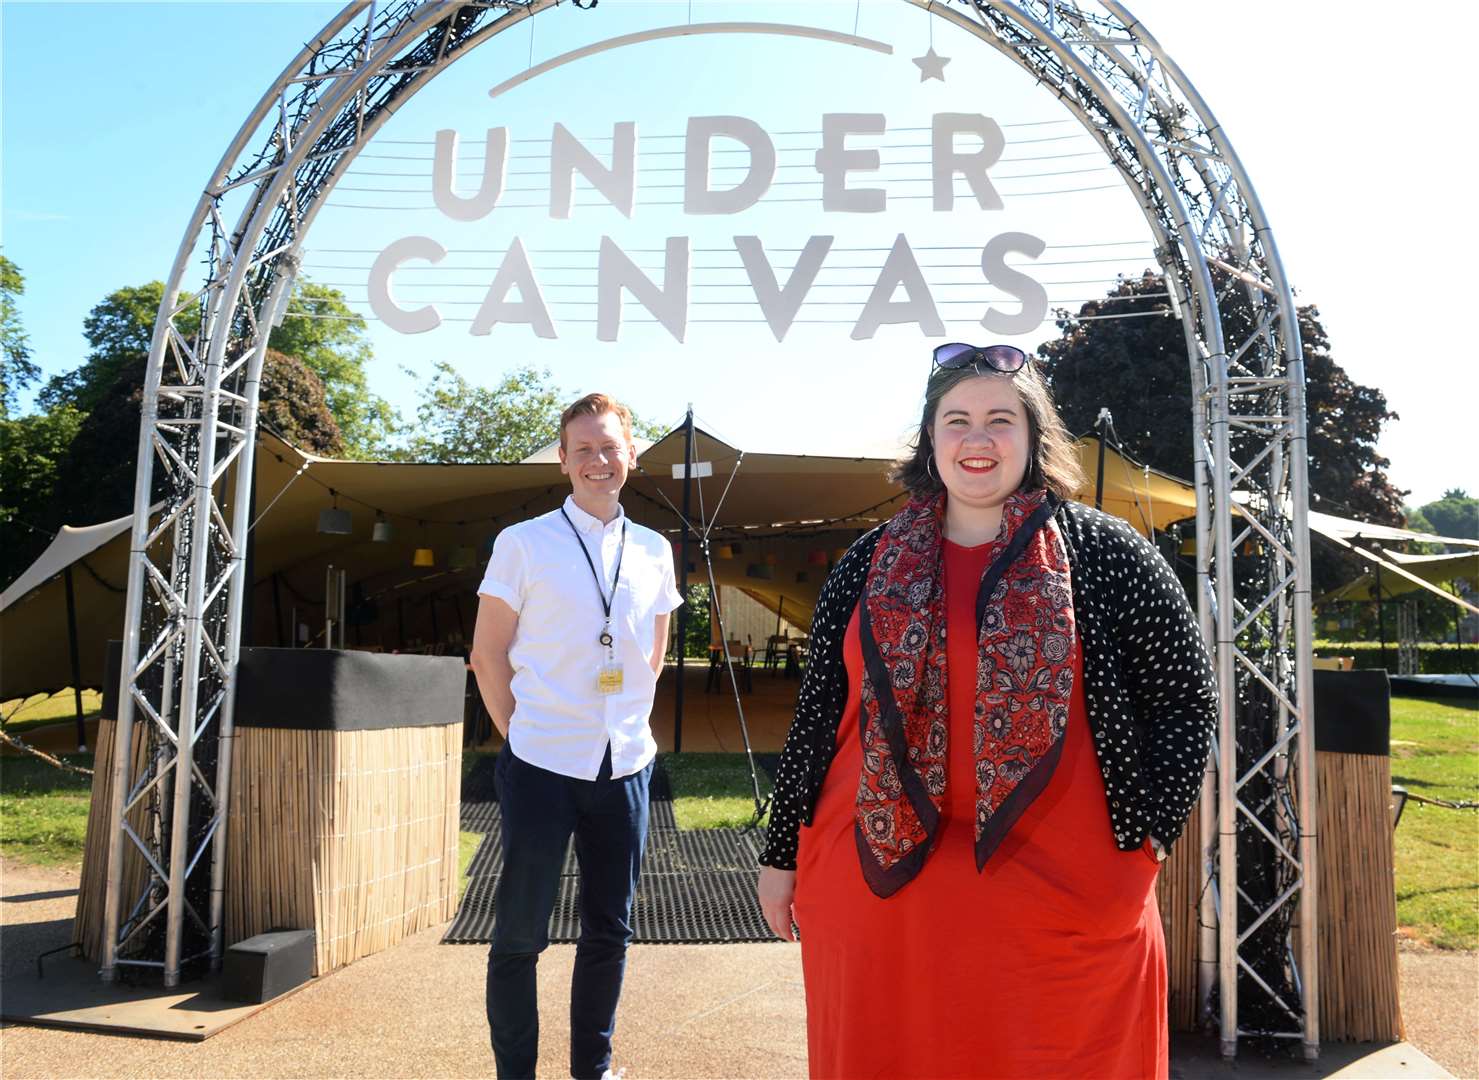 Eden Court chief executive James Mackenzie-Blackman and Under Canvas producer Seona McClintock. Picture: Gary Anthony